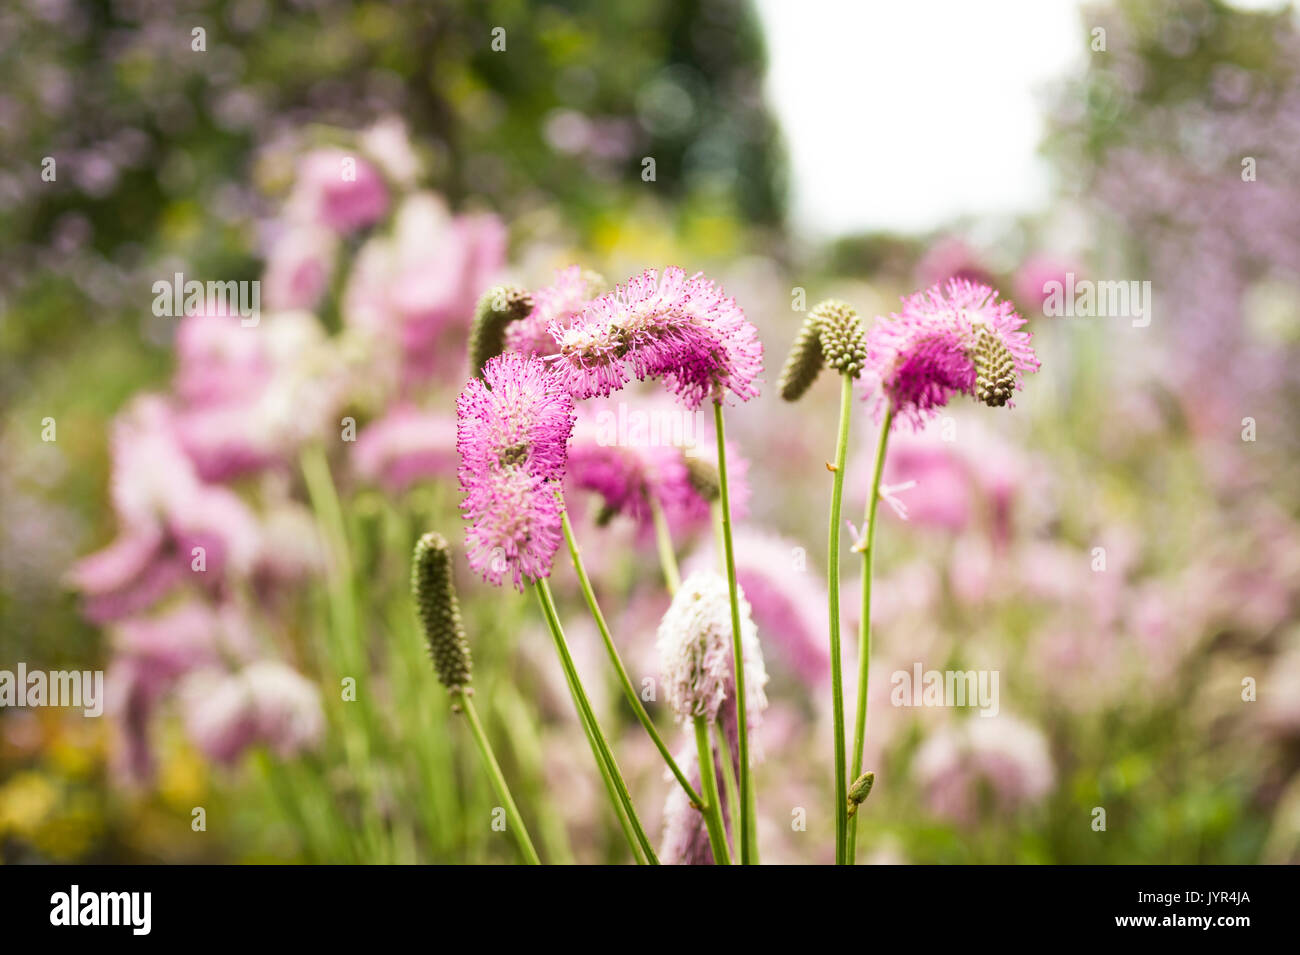 Close up of perennial Sanguisorba Obtusa (Burnet) with fluffy pink flowerheads and stamens Stock Photo